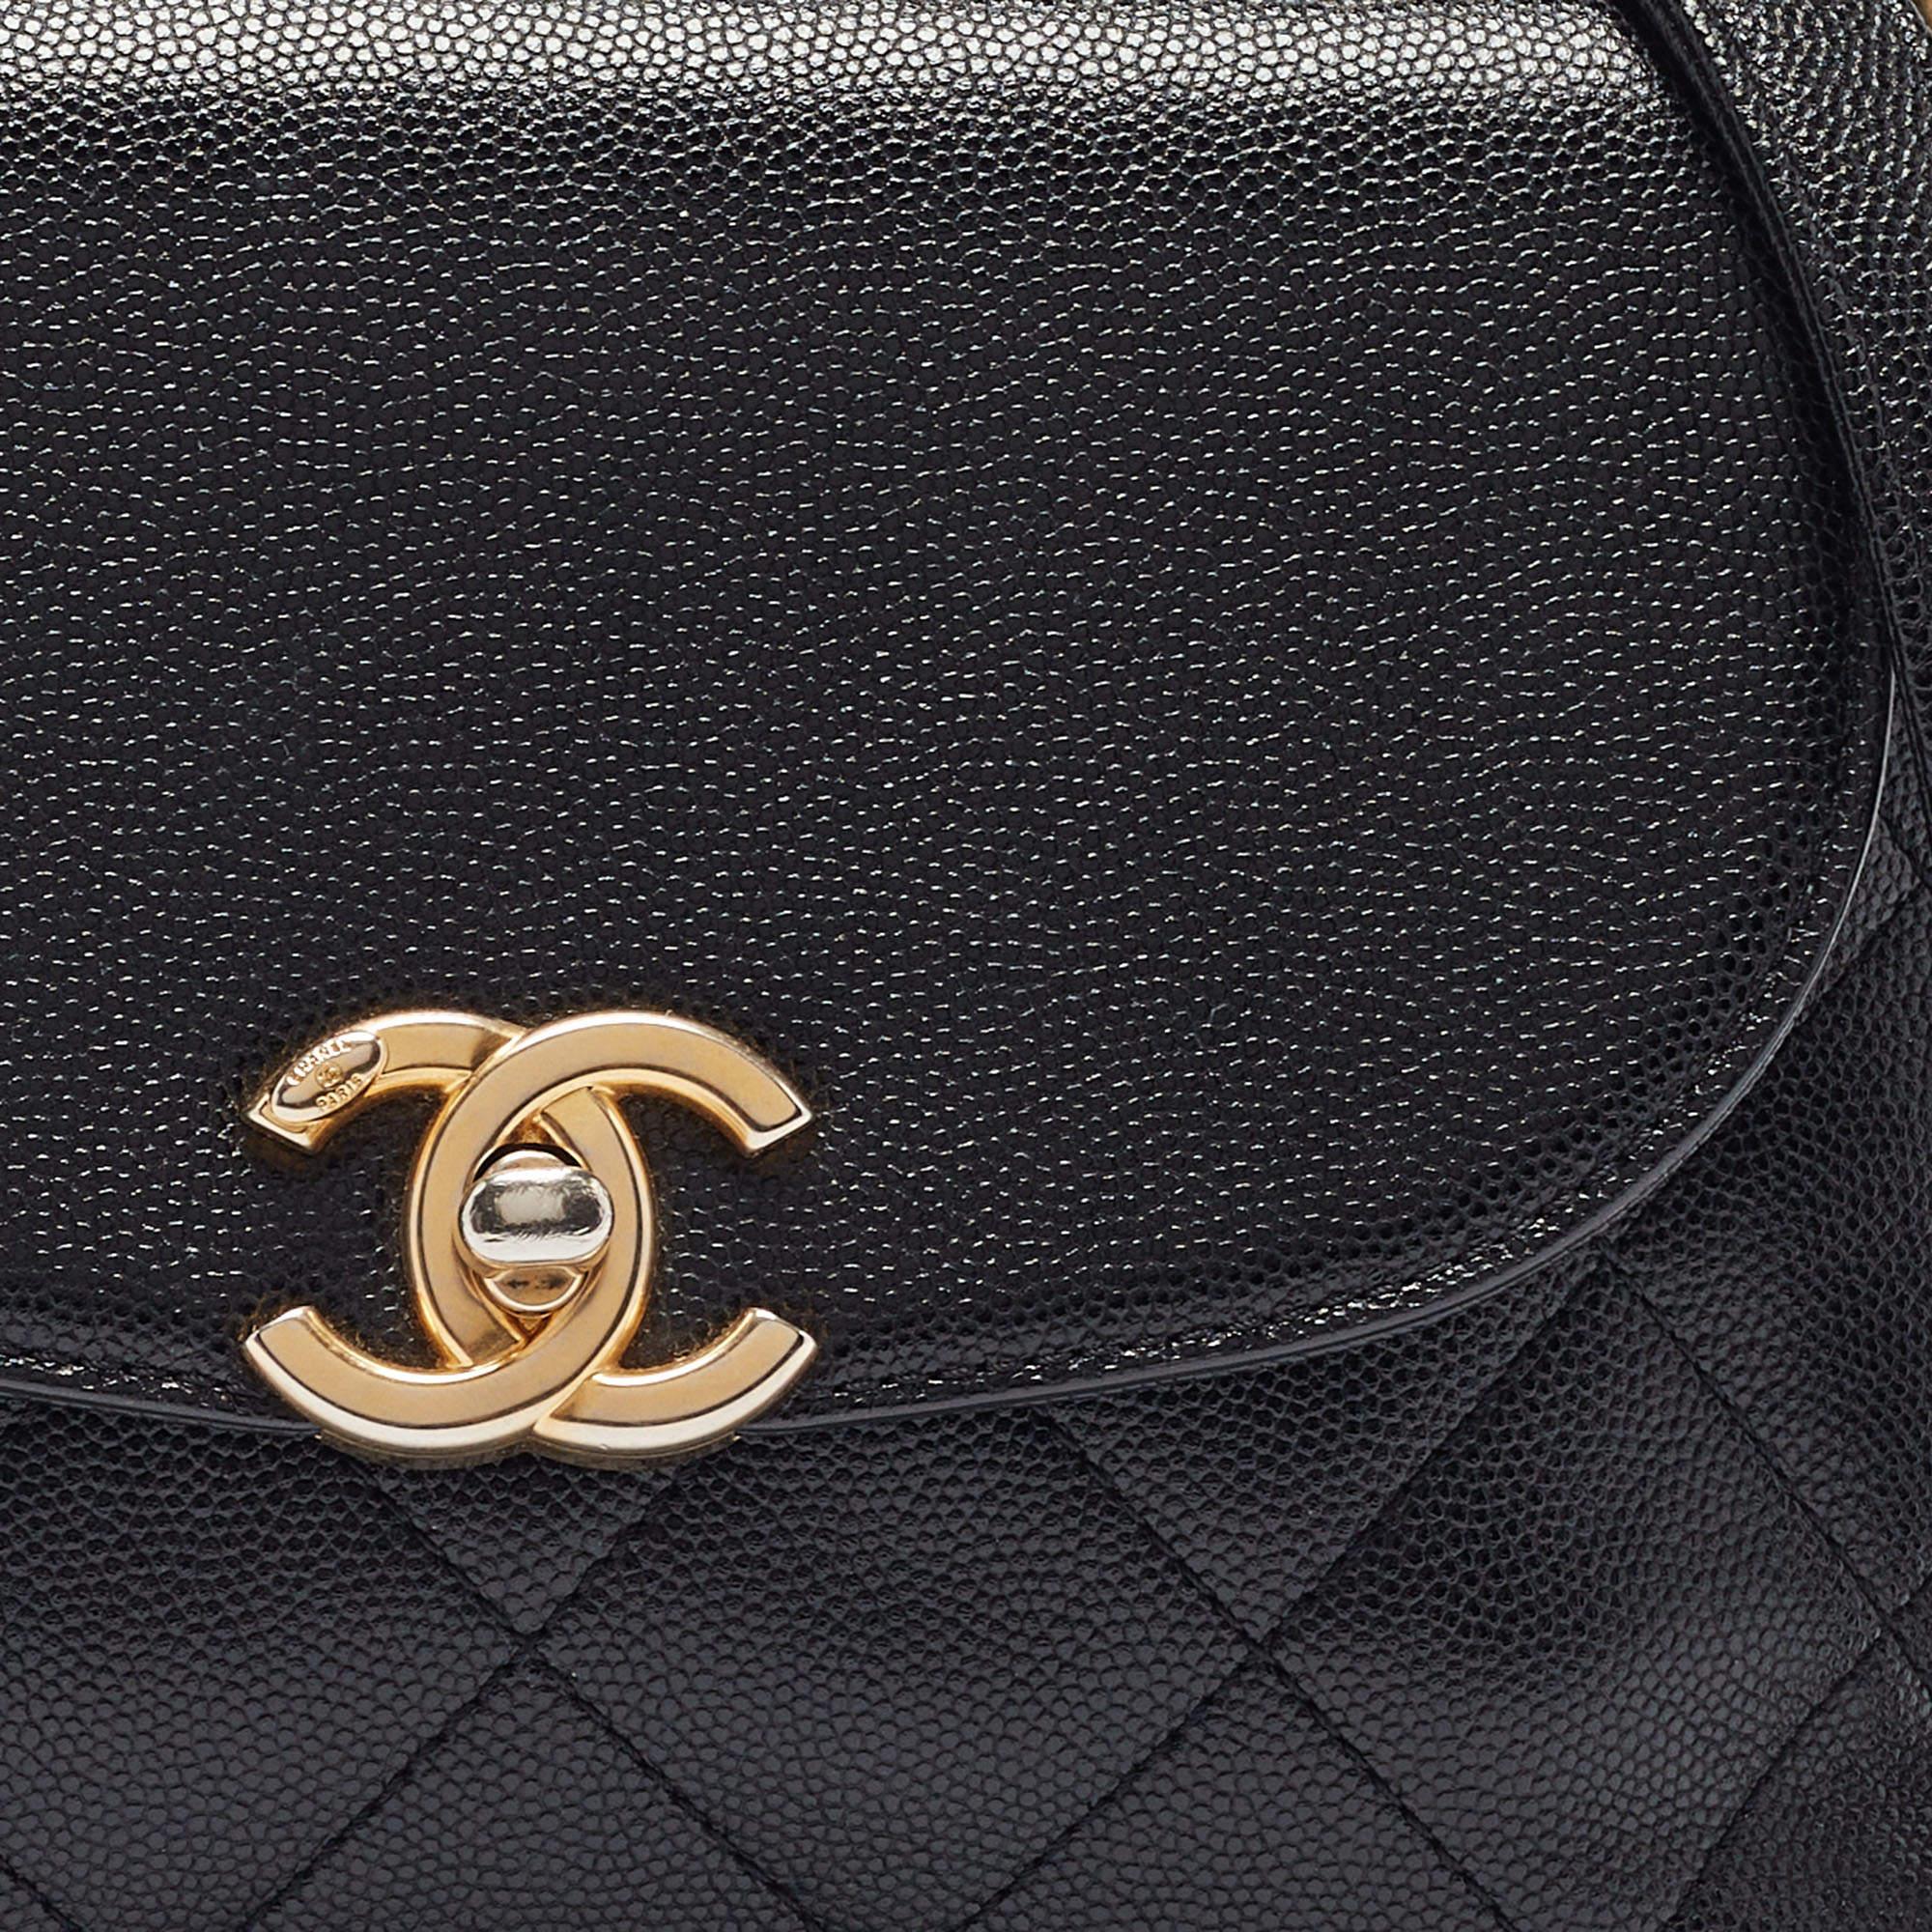 Chanel Black Quilted Leather CC Chain Scarf Top Handle Bag 2